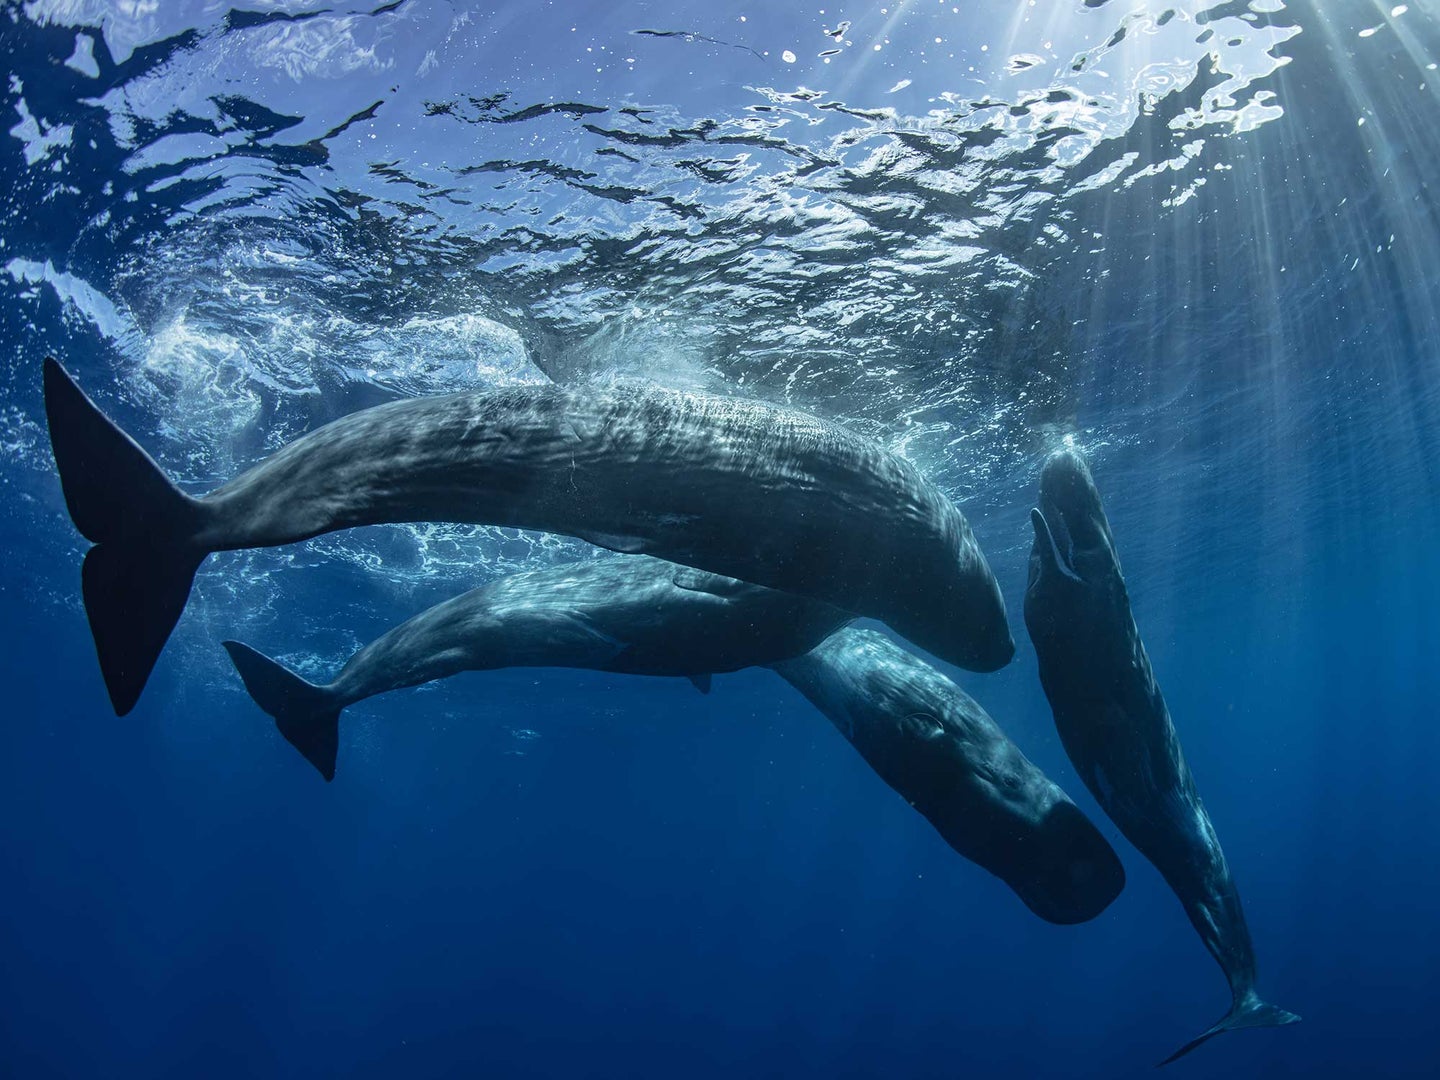 In the Mediterranean Sea, ship strikes are the leading cause of death for sperm whales.